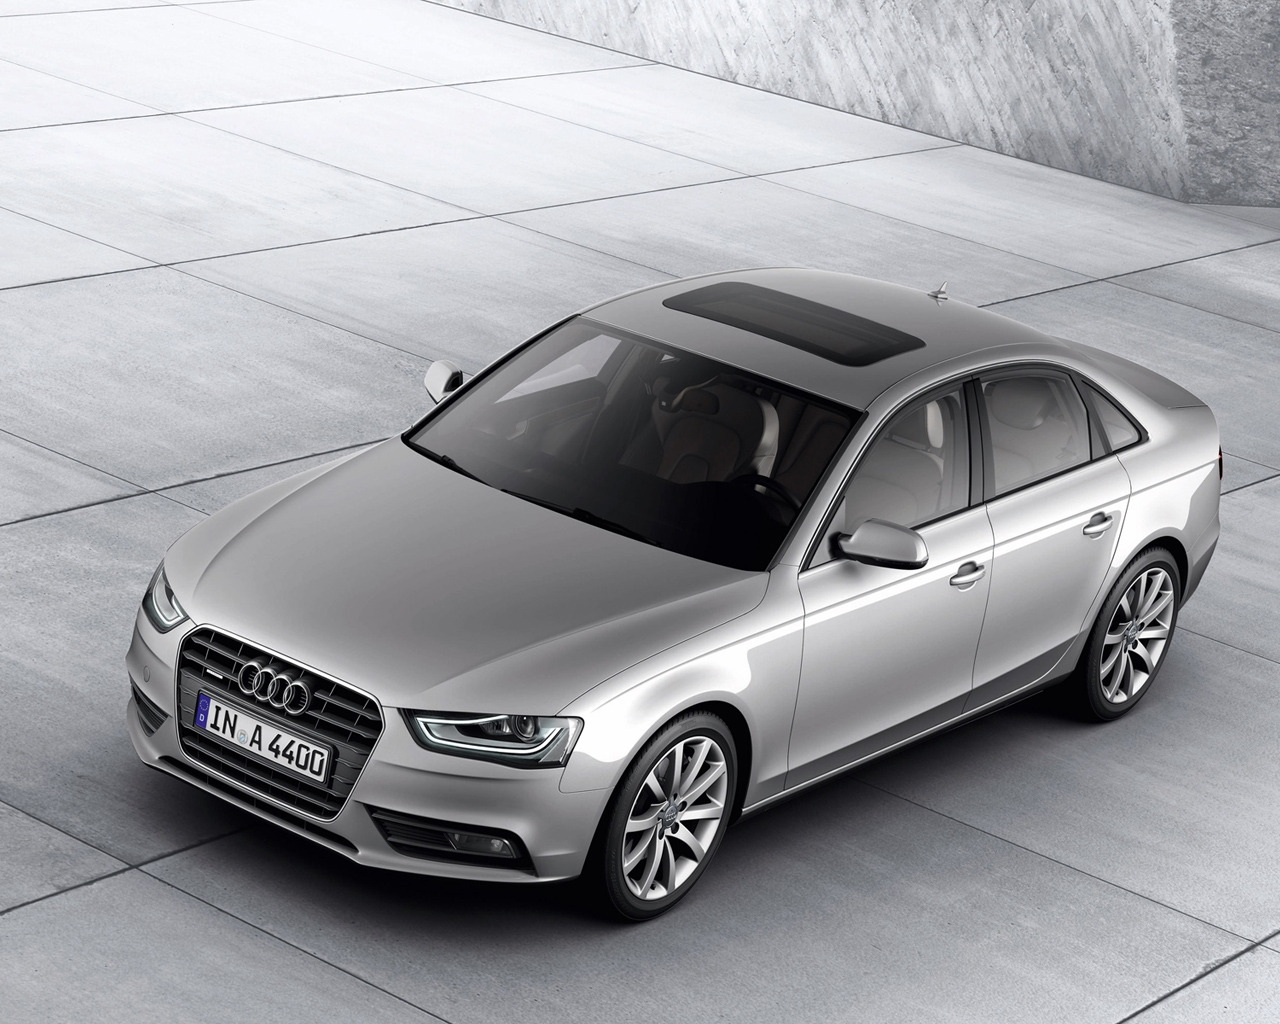 2012 Audi A4 for 1280 x 1024 resolution